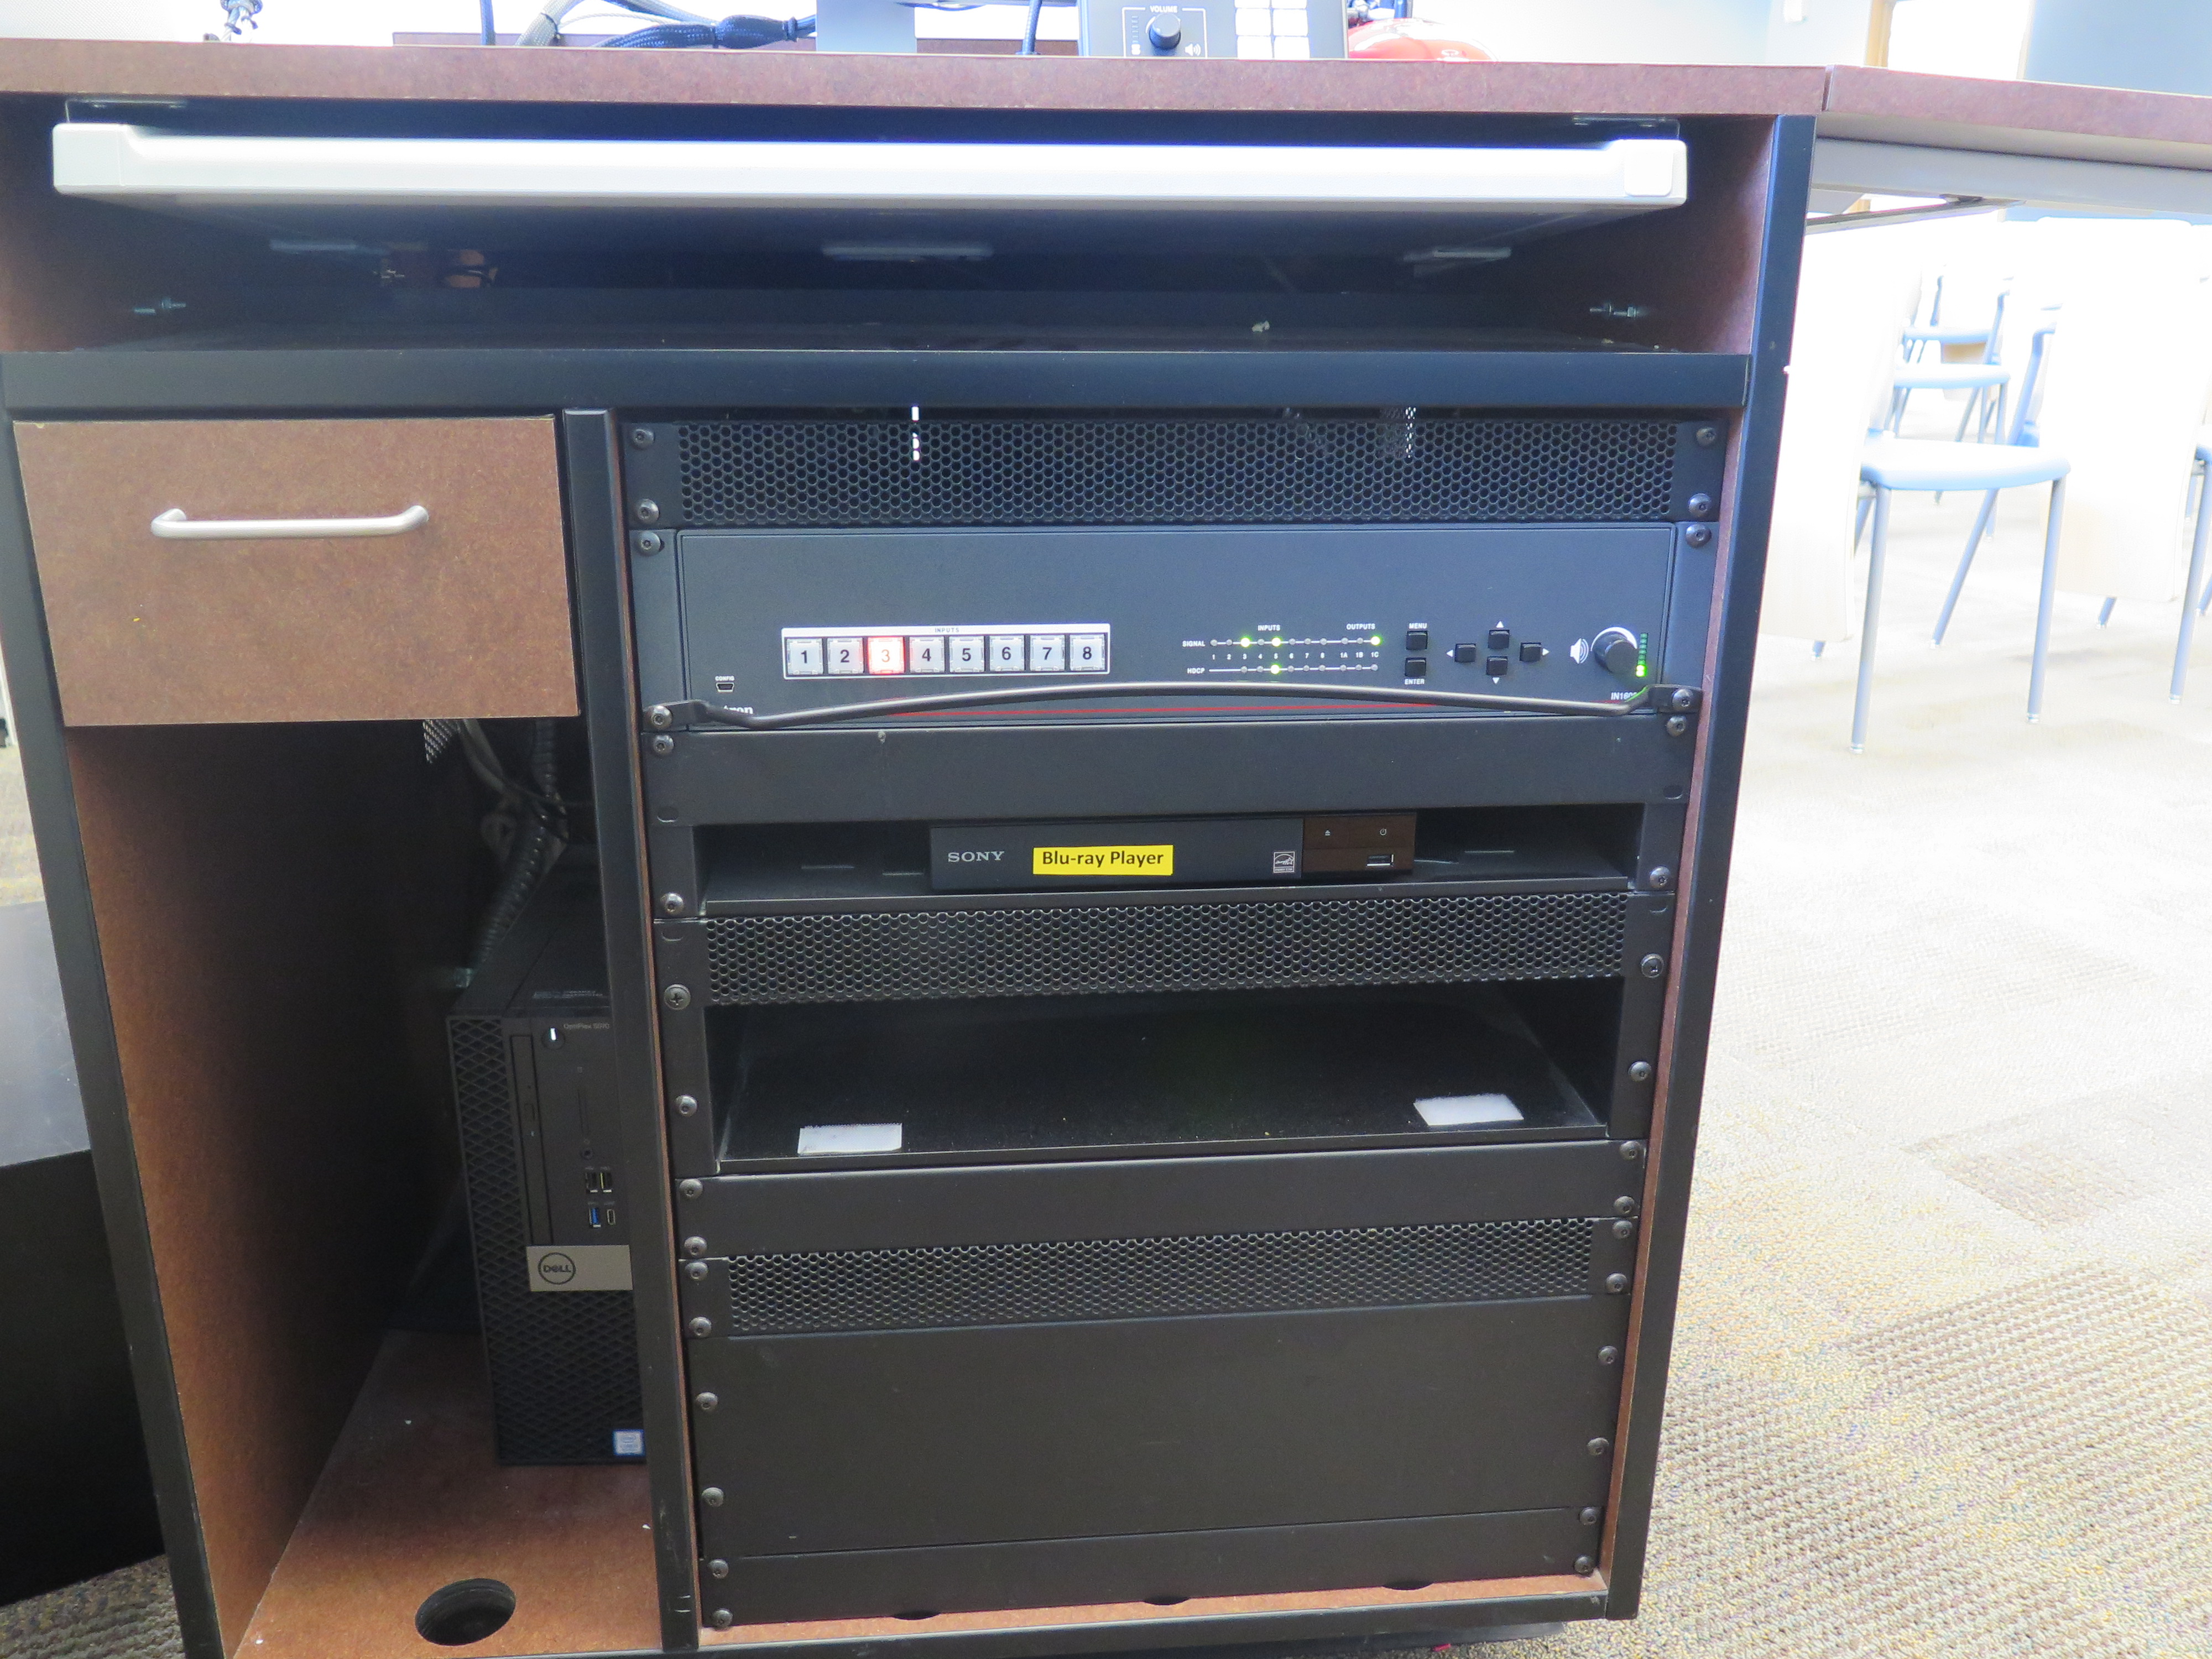 Display rack consists of a AV controller, Blu-Ray/DVD player and Dell Computer